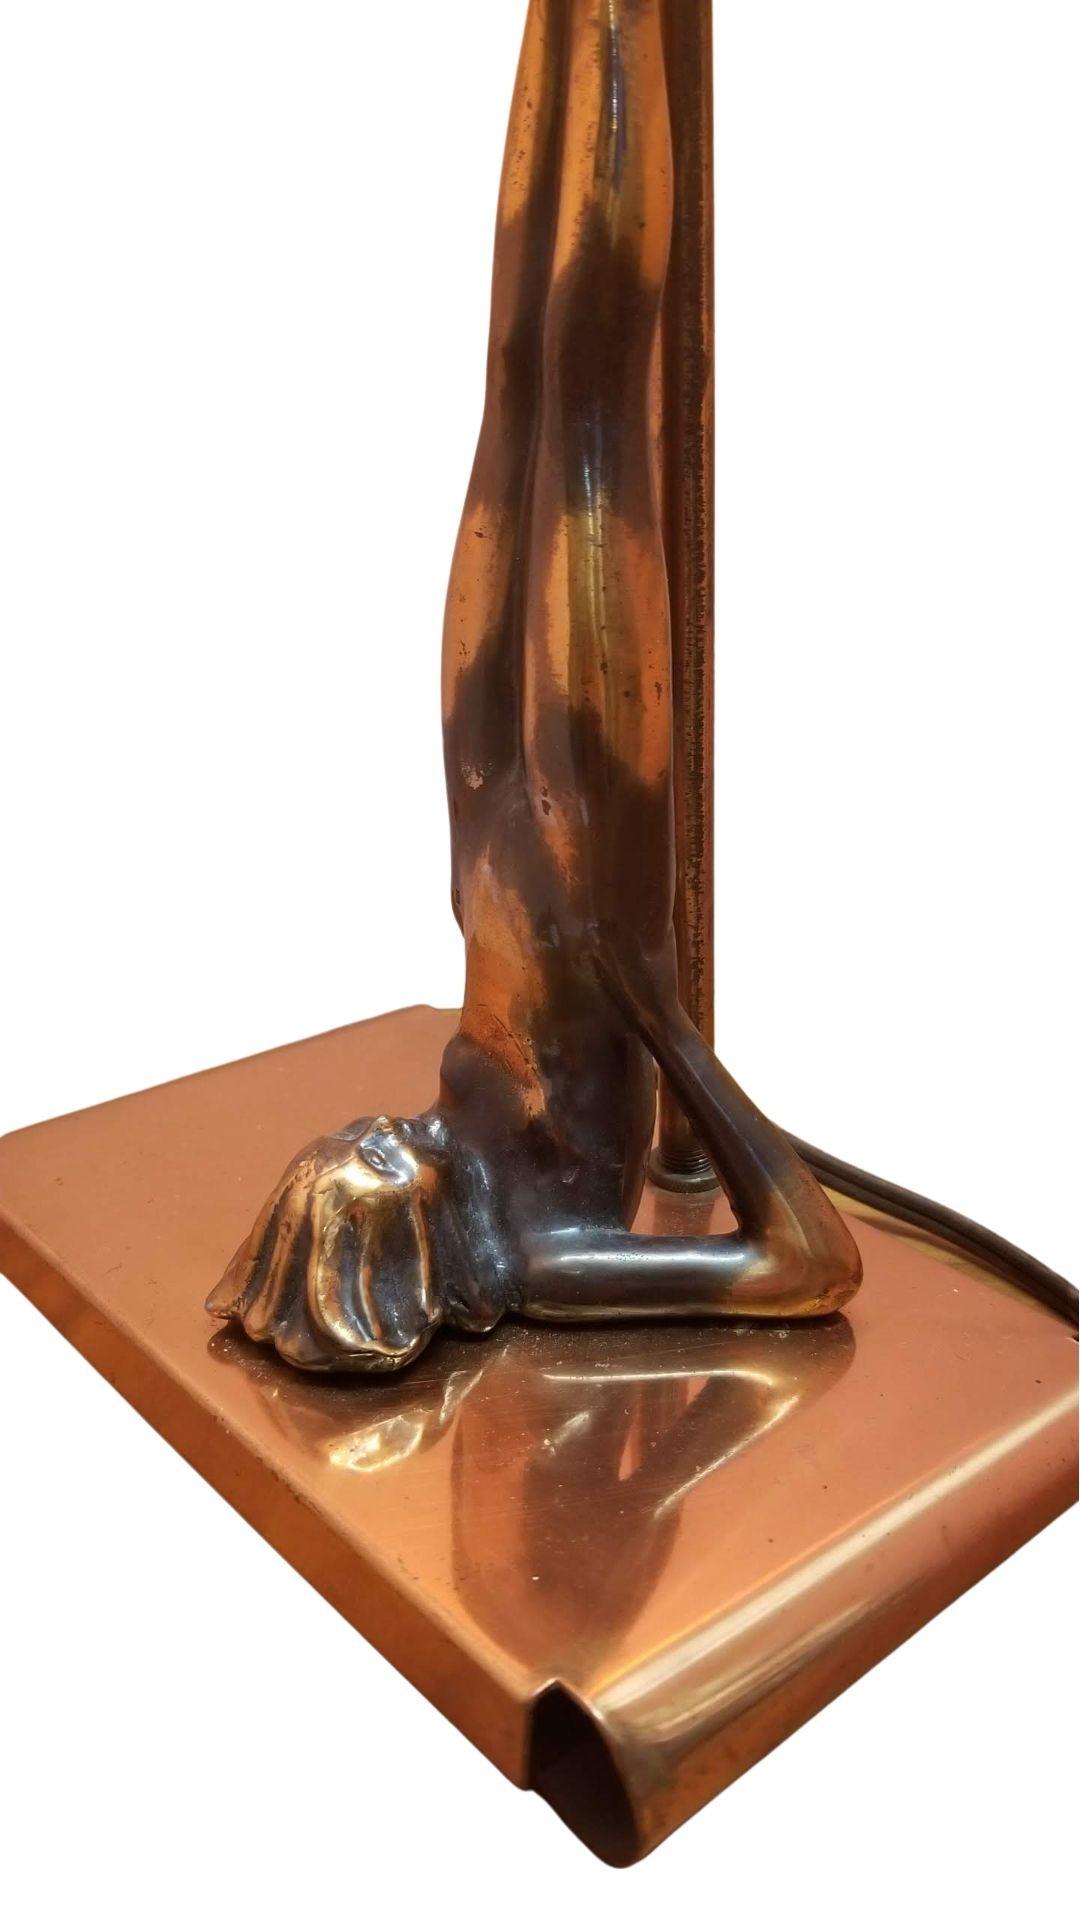 1920s copper Art Deco Frankart table lamp featuring a nude female figurine base. While most Frankart was made of spelter metal this is a solid copper casting only made upon special request to Frankart, very rare and hard to find.

This is Sculpture